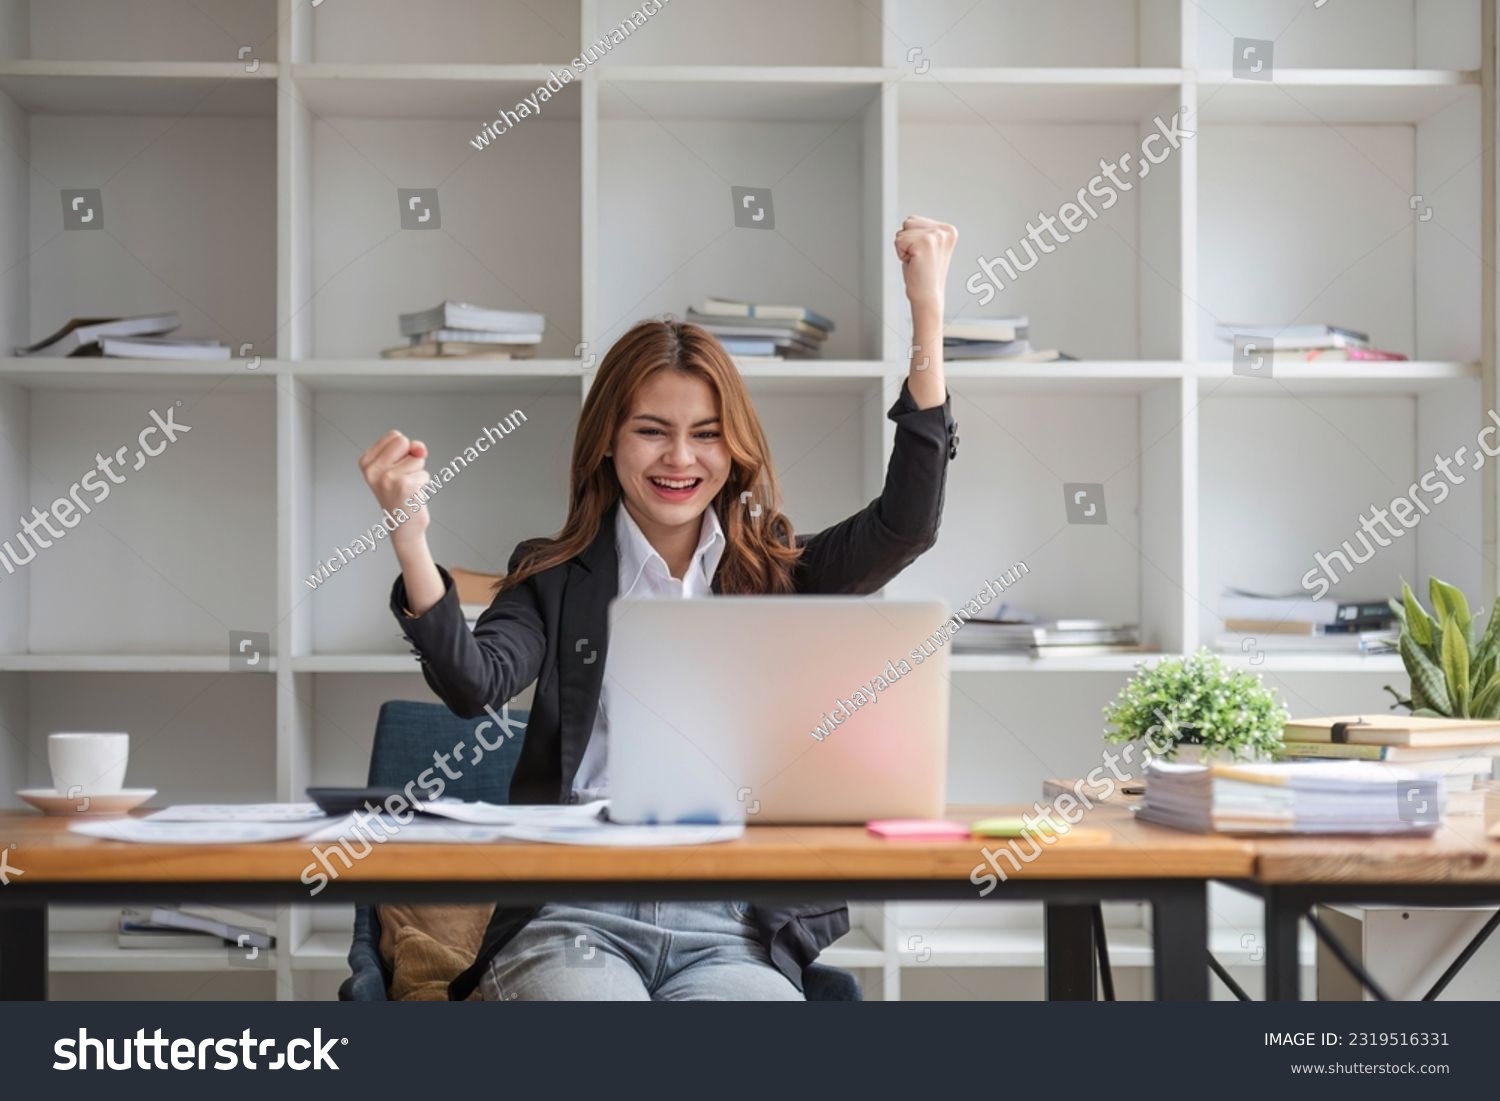 Excited female feeling euphoric celebrating online win success achievement result, young woman happy about good email news, motivated by great offer or new opportunity, passed exam, got a job #2319516331